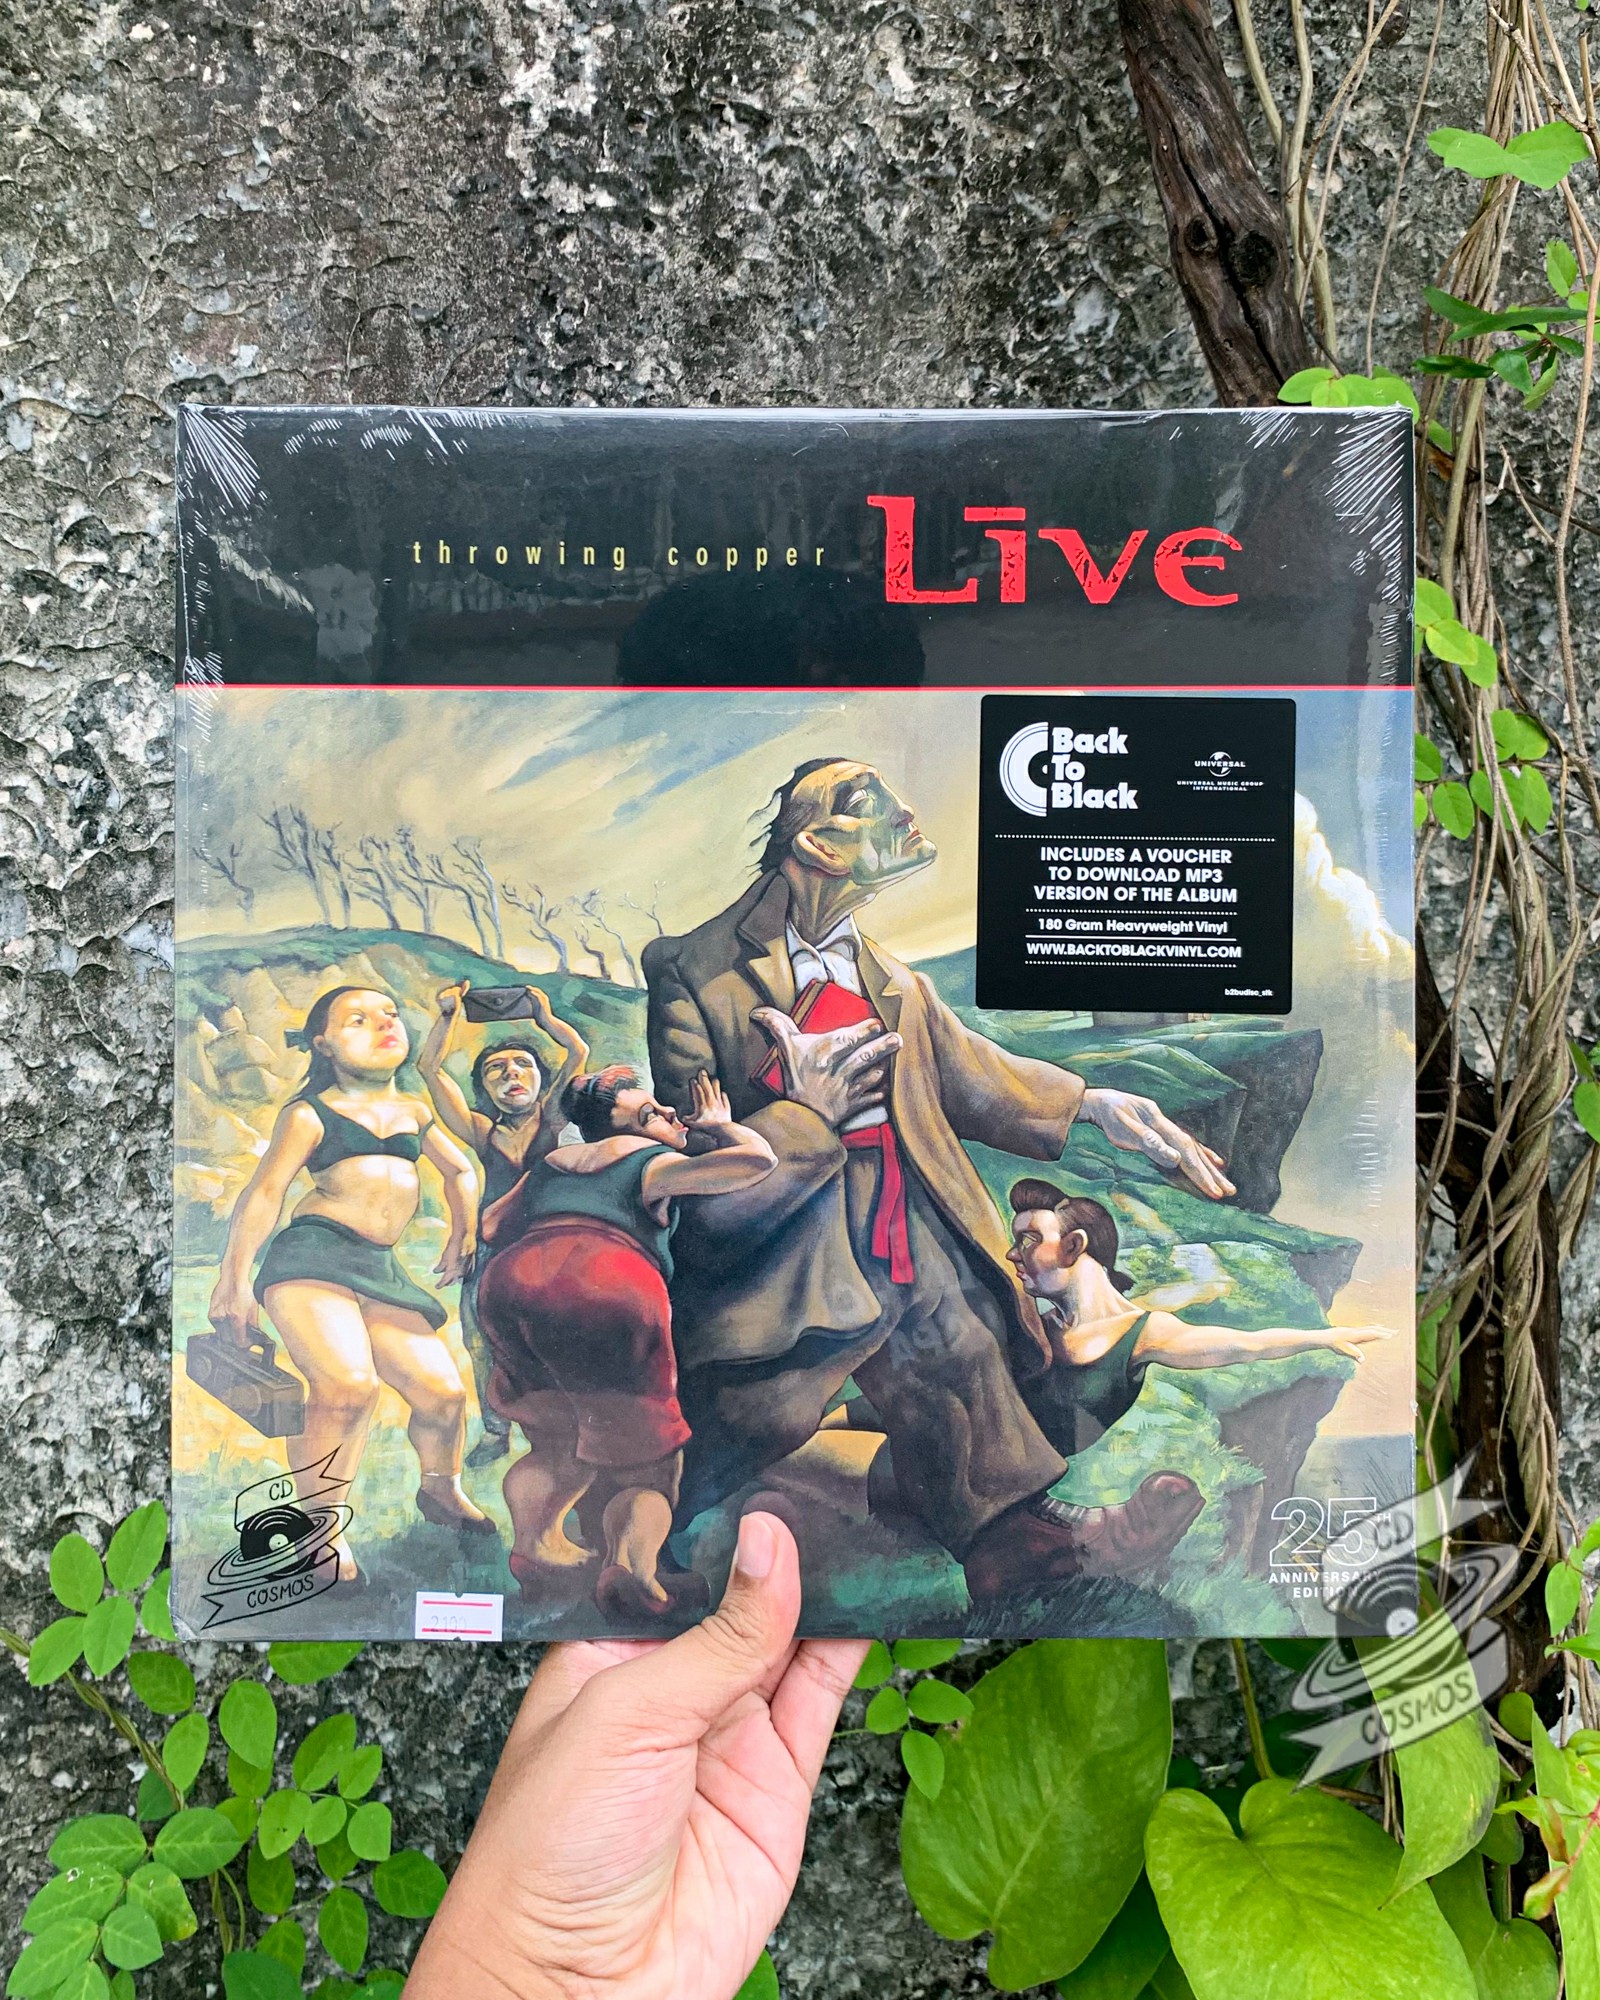 Live – Throwing Copper cdcosmos